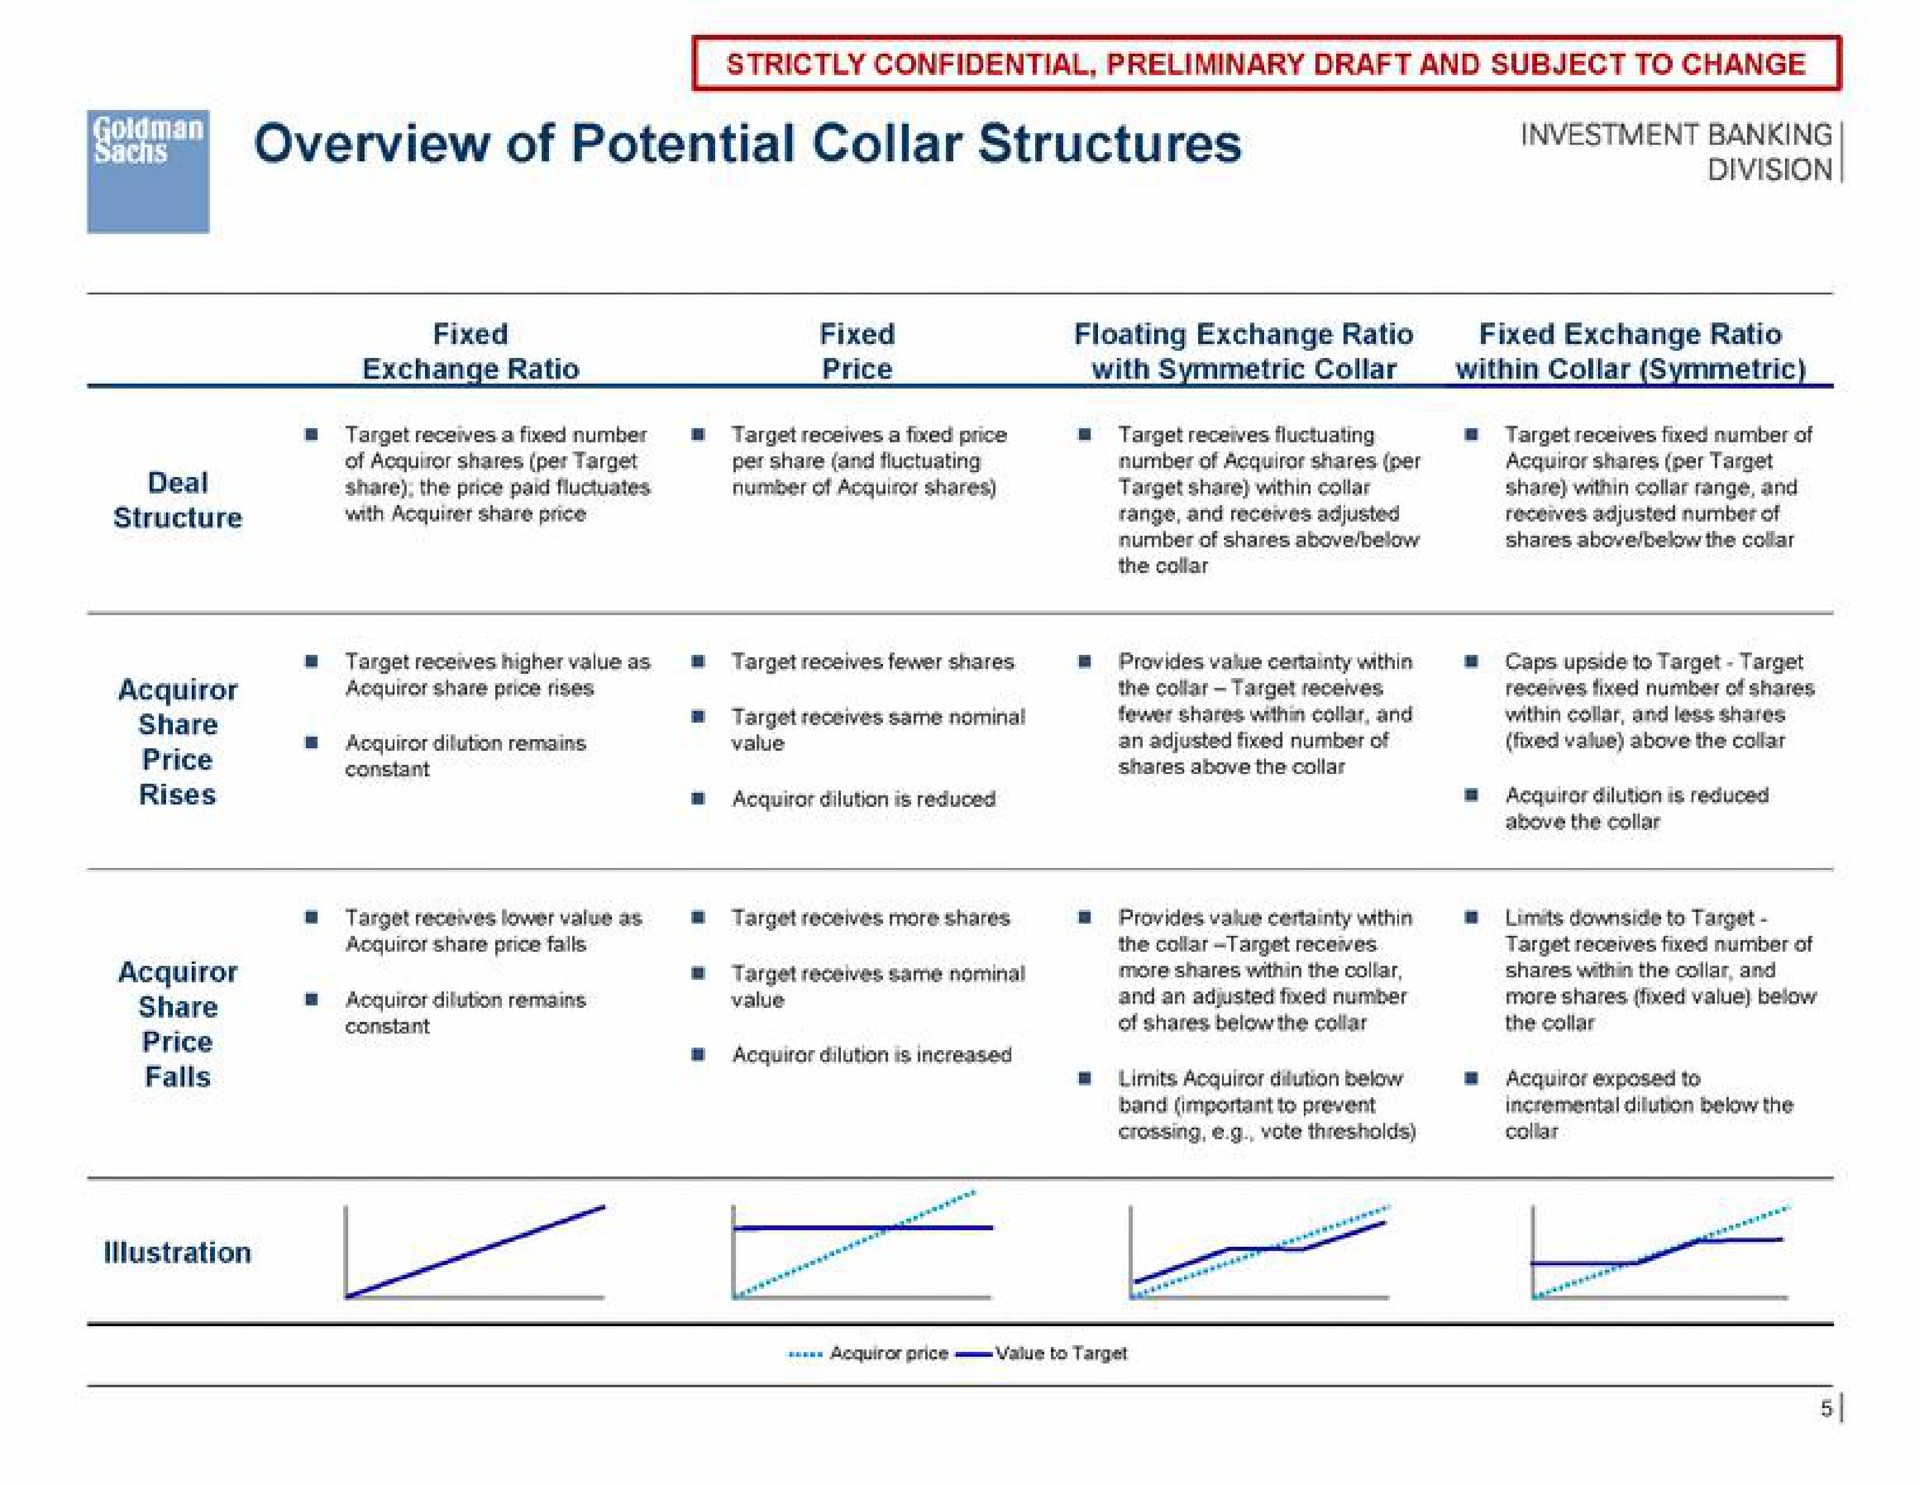 overview of potential collar structures strictly confidential preliminary draft and subject to change | Goldman Sachs